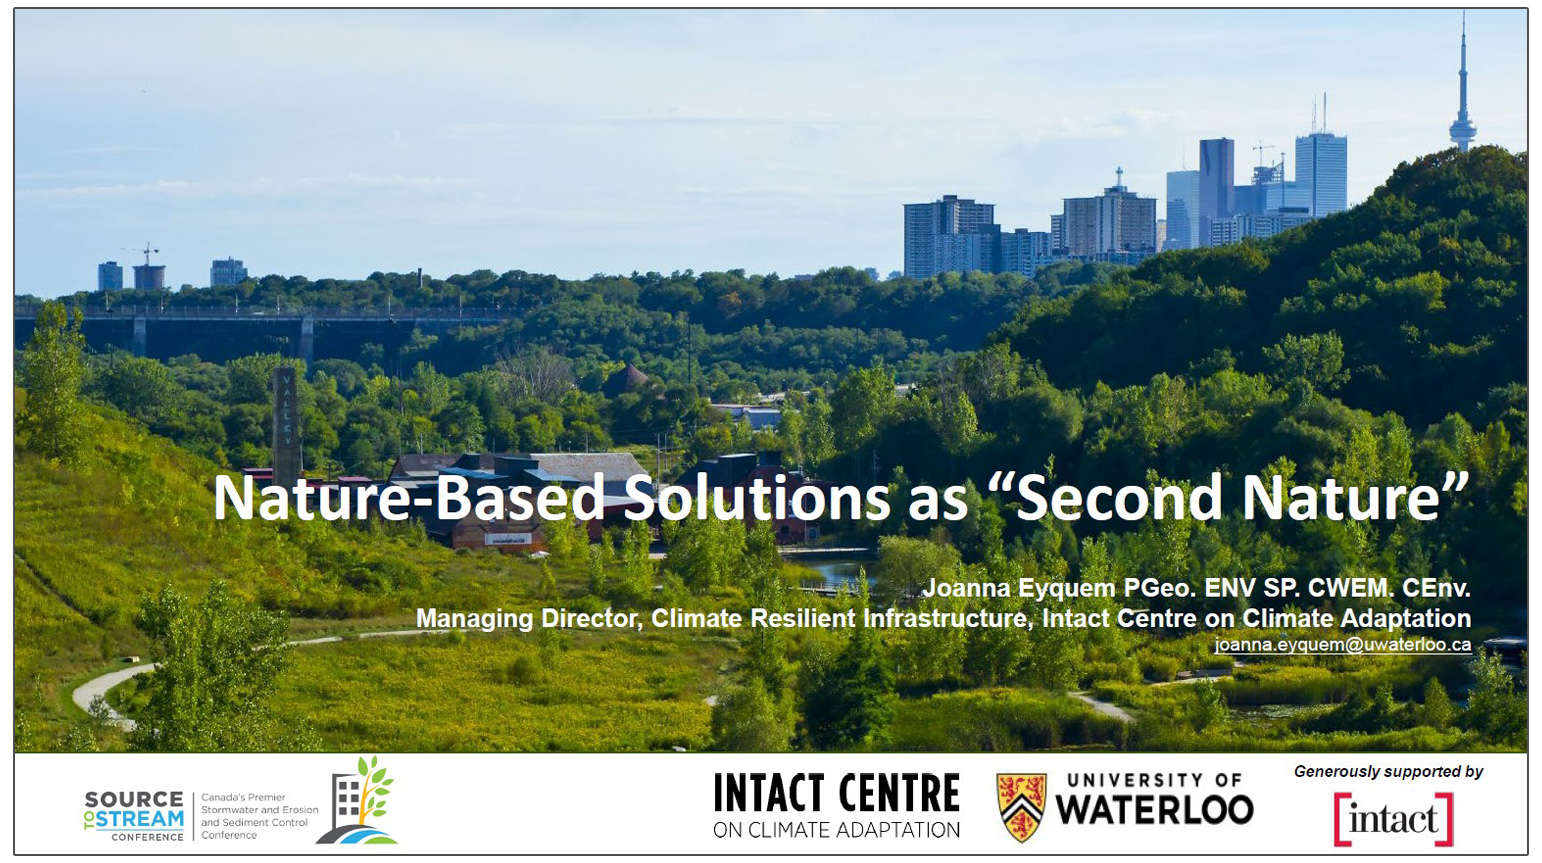 Nature-Based Solutions as Second Nature - presentation by Joanna Eyquem